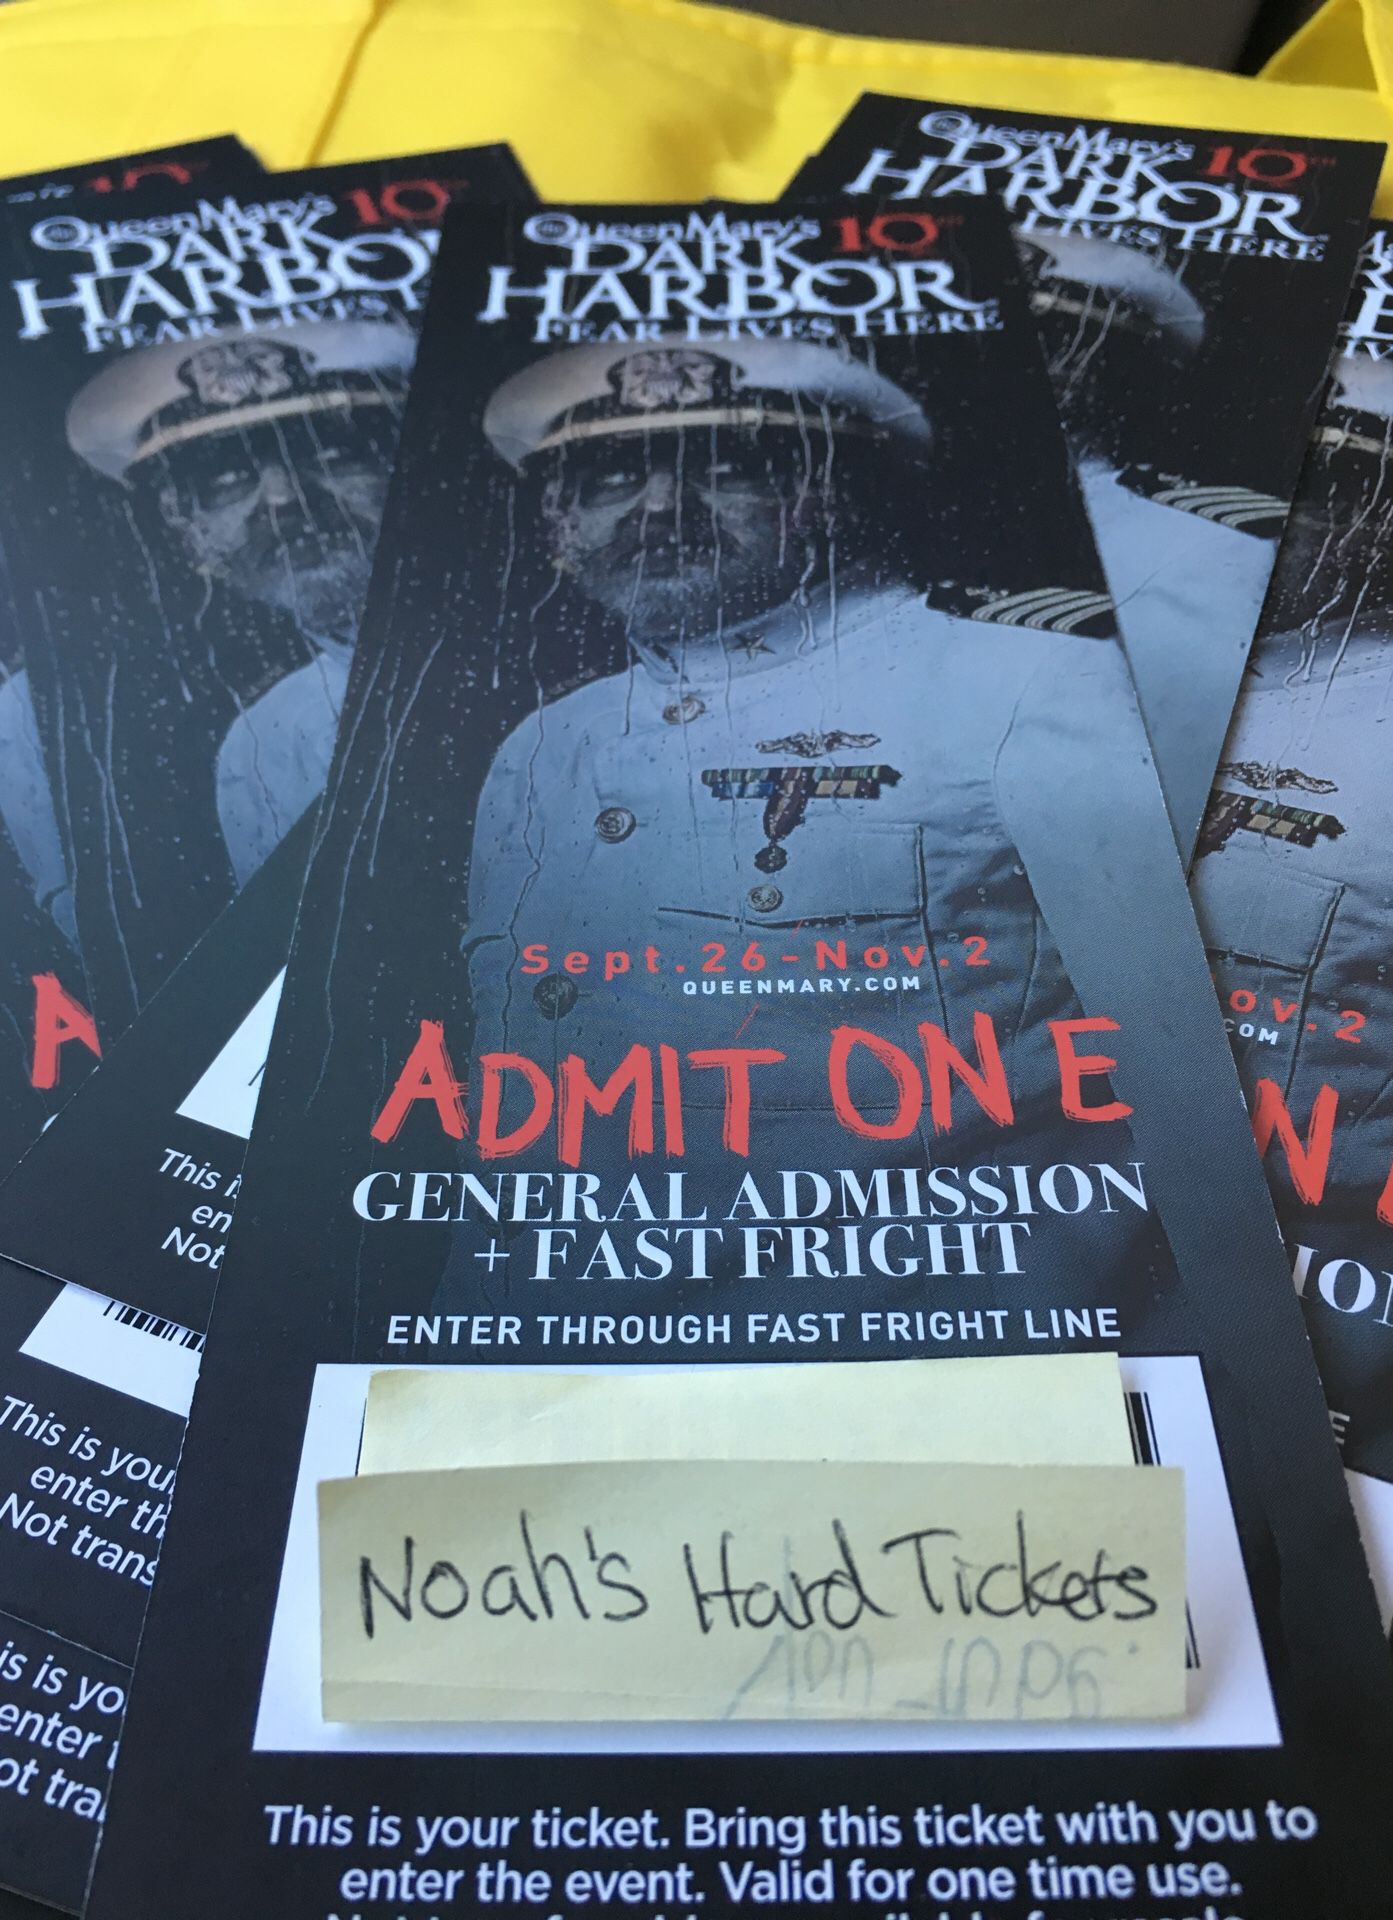 $49 each QUEEN MARY DARK HARBOR FRONT OF THE LINE TICKETS